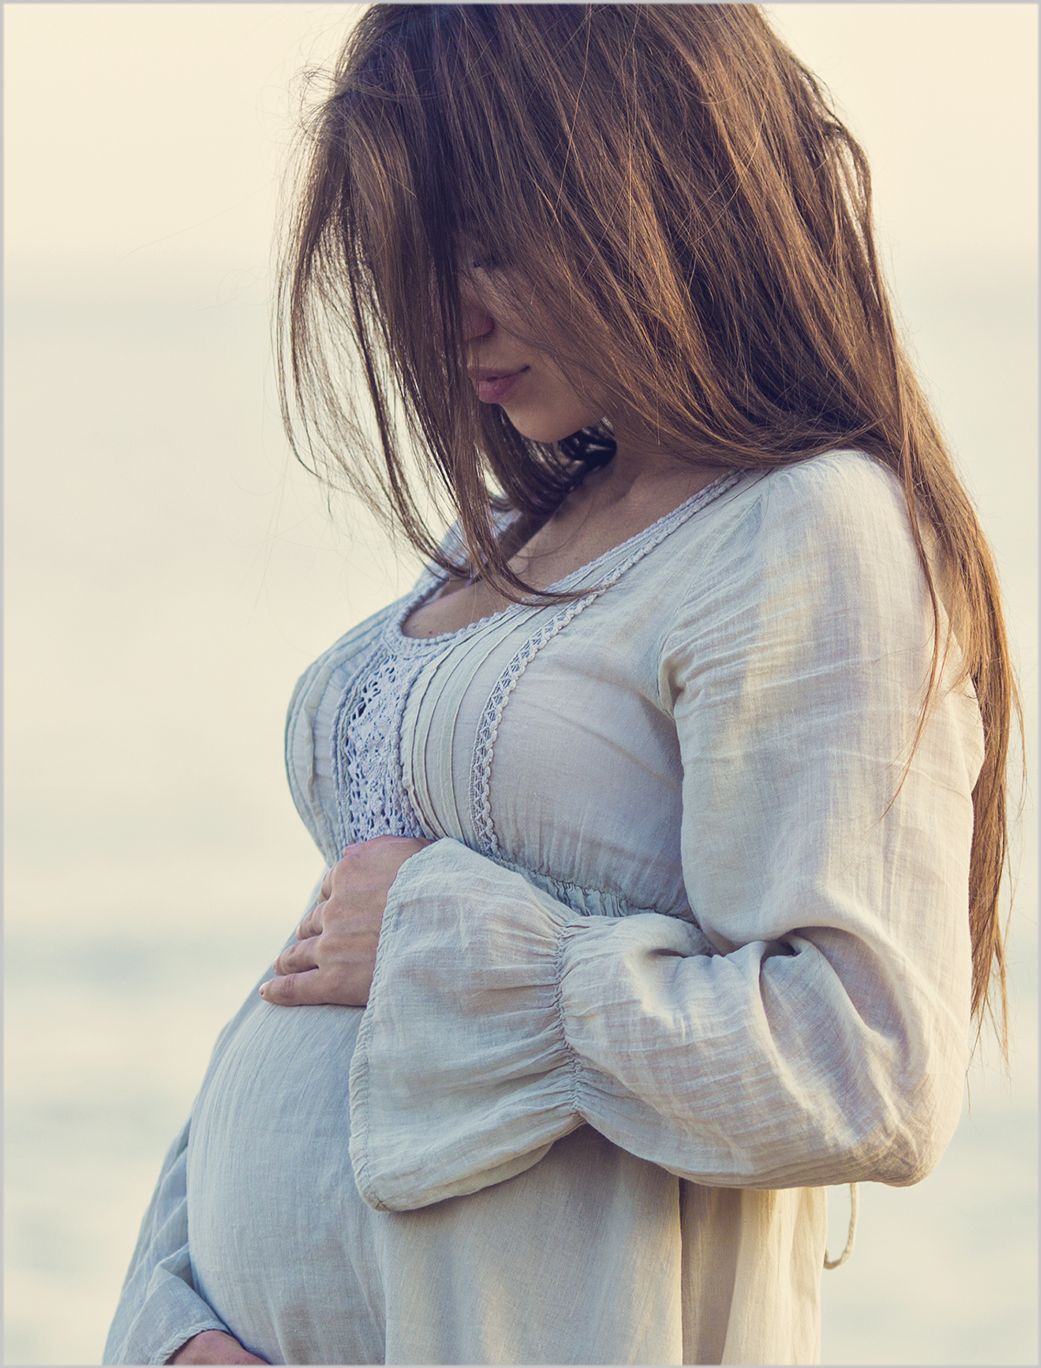 HAIR AND PREGNANCY. WHAT TO DO WHEN YOUR HAIR STARTS TO GO SOUTH.